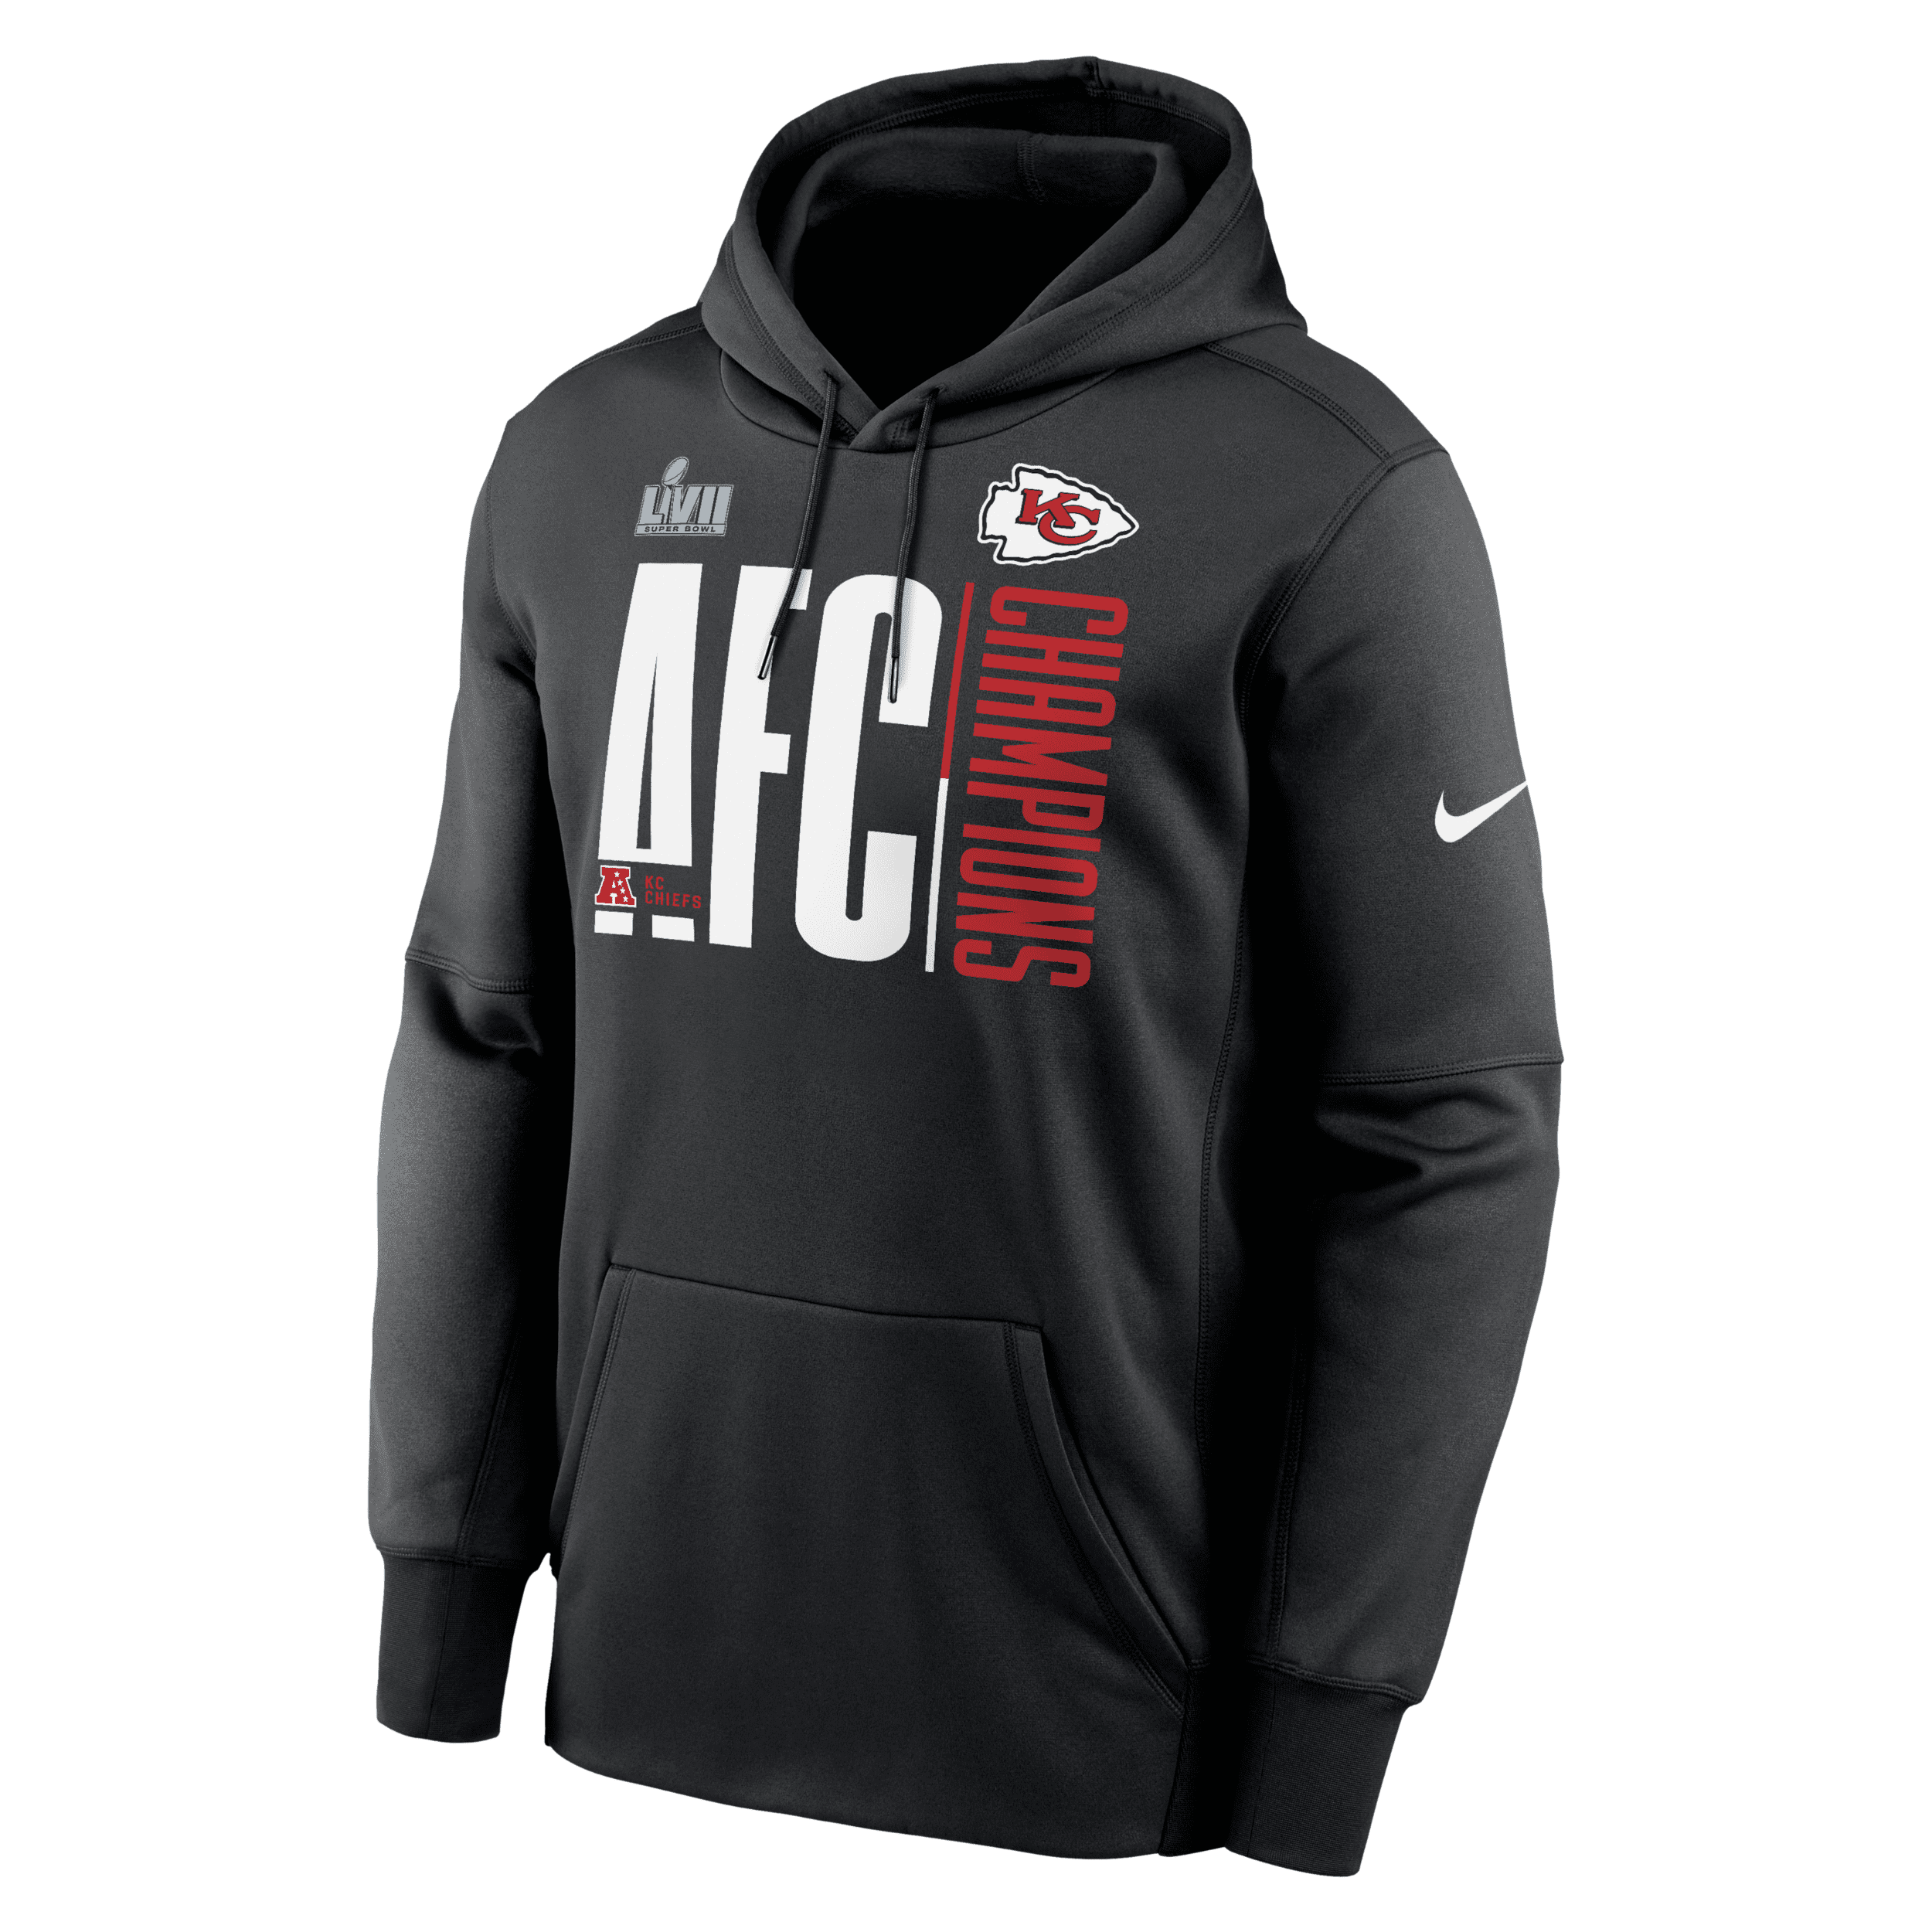 NIKE MEN'S  THERMA 2022 AFC CHAMPIONS ICONIC (NFL KANSAS CITY CHIEFS) PULLOVER HOODIE,1013844595